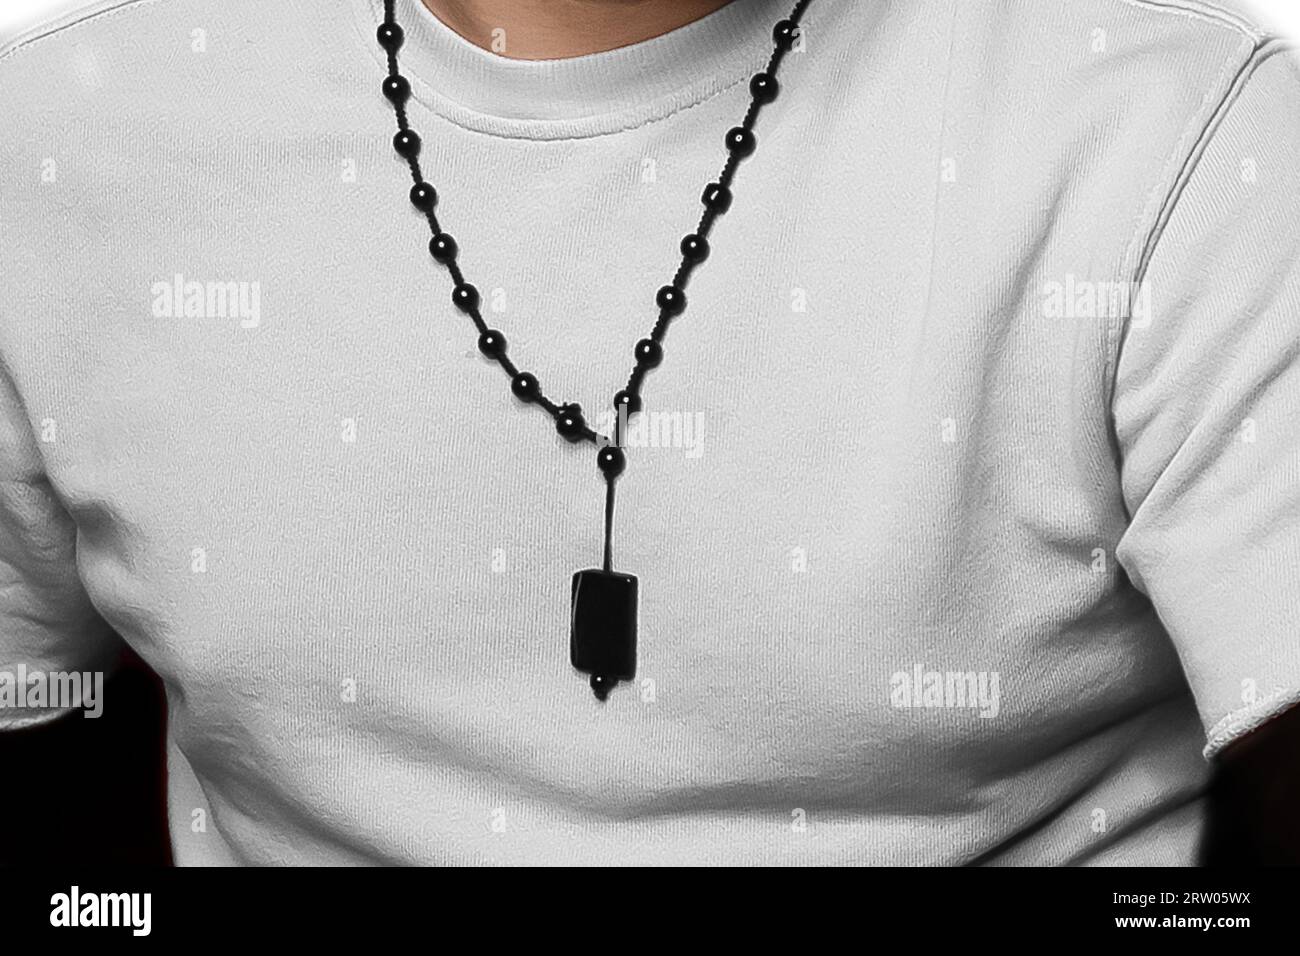 Men's style clothing fashionable white T-shirt with a decoration around the neck close-up. Stock Photo